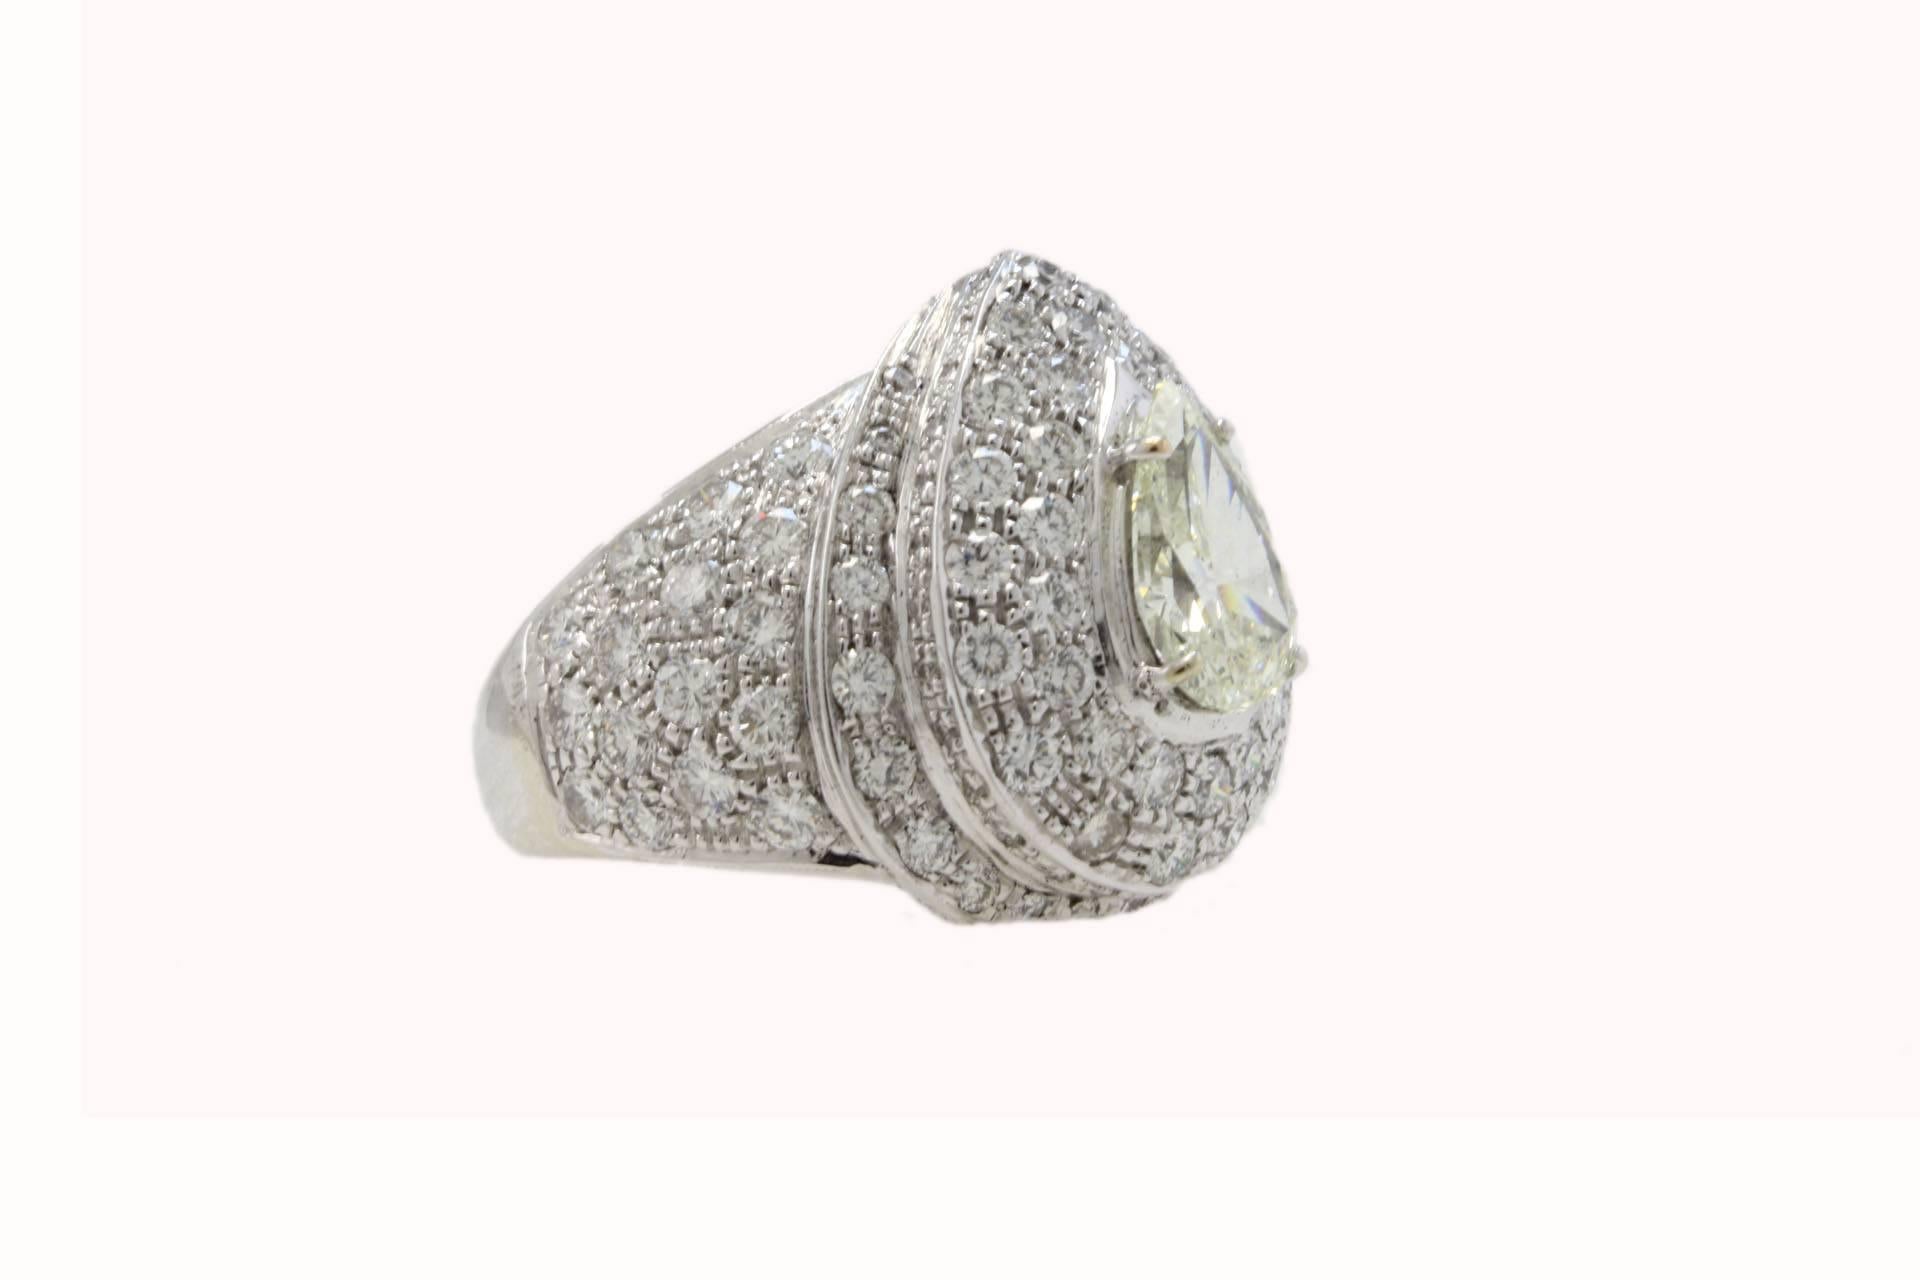 SHIPPING POLICY:
No additional costs will be added to this order.
Shipping costs will be totally covered by the seller (customs duties included).

Extraordinary fashion ring entirely composed of 2 domes of diamonds, on top of them a single drop of